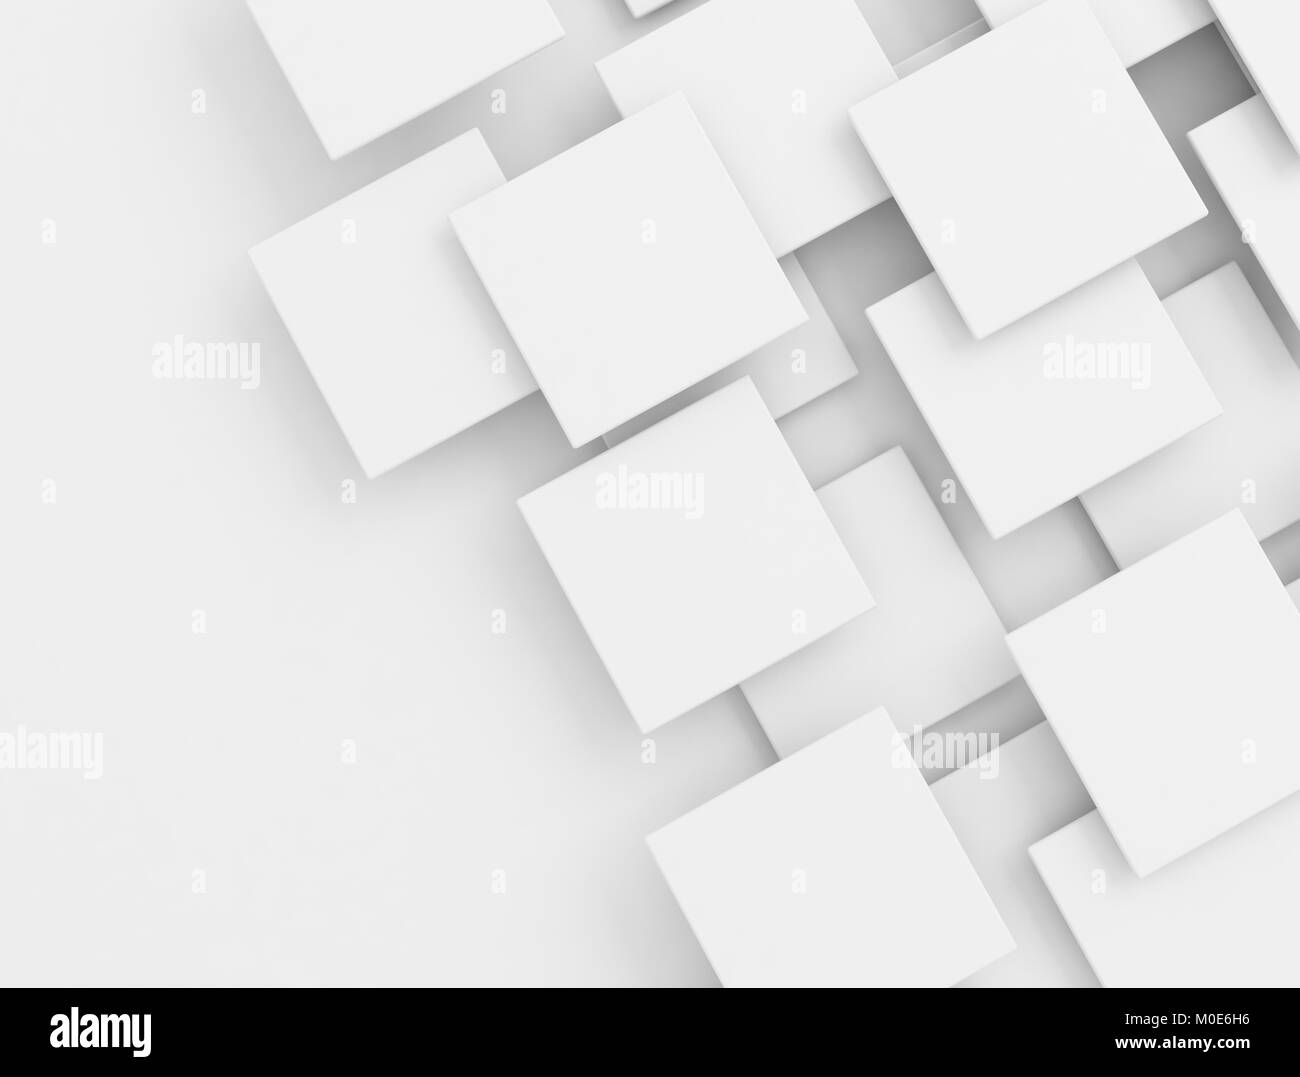 White squares overlapping 3d design tech background Stock Photo